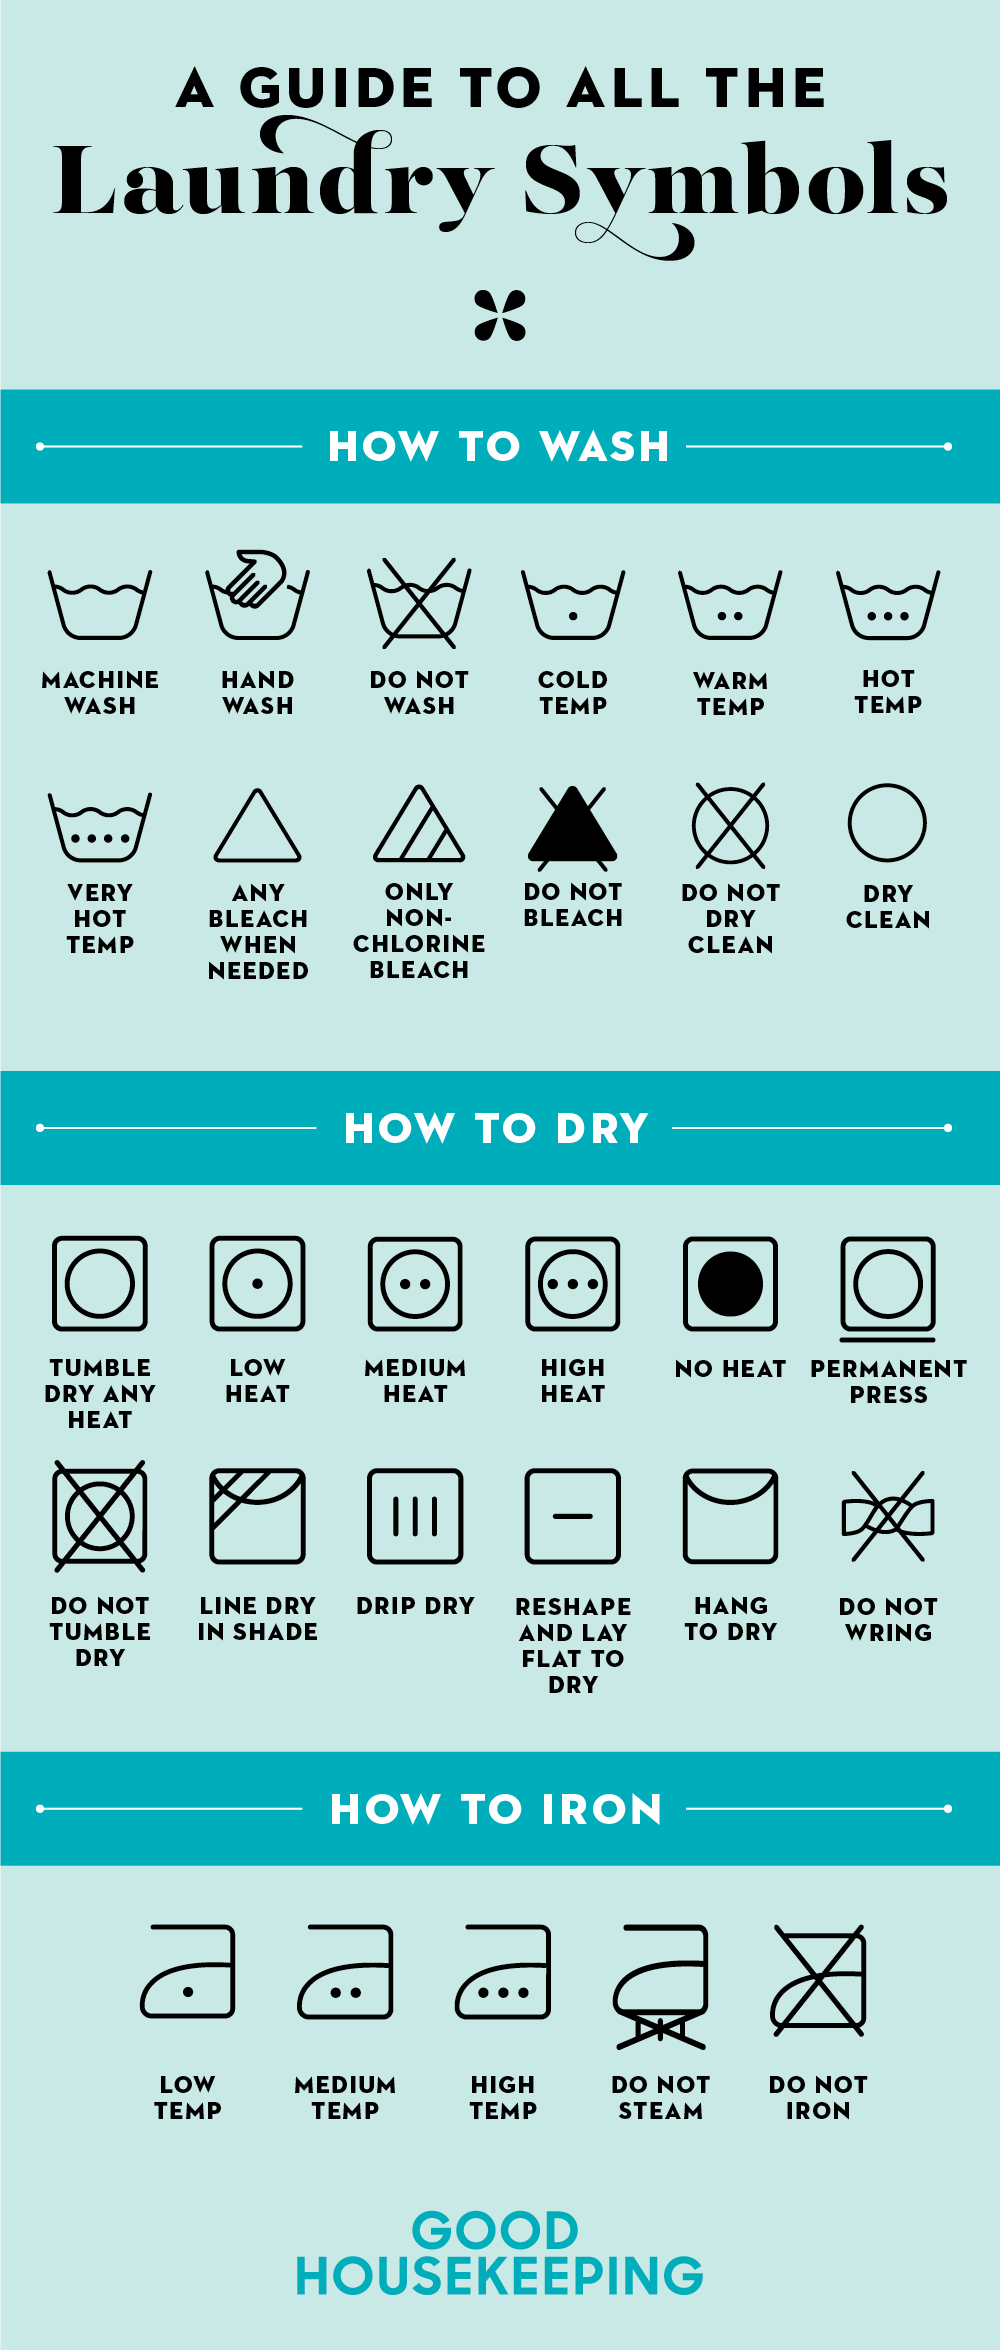 Practical Guide to Doing Laundry While Traveling - All You Need to Know!